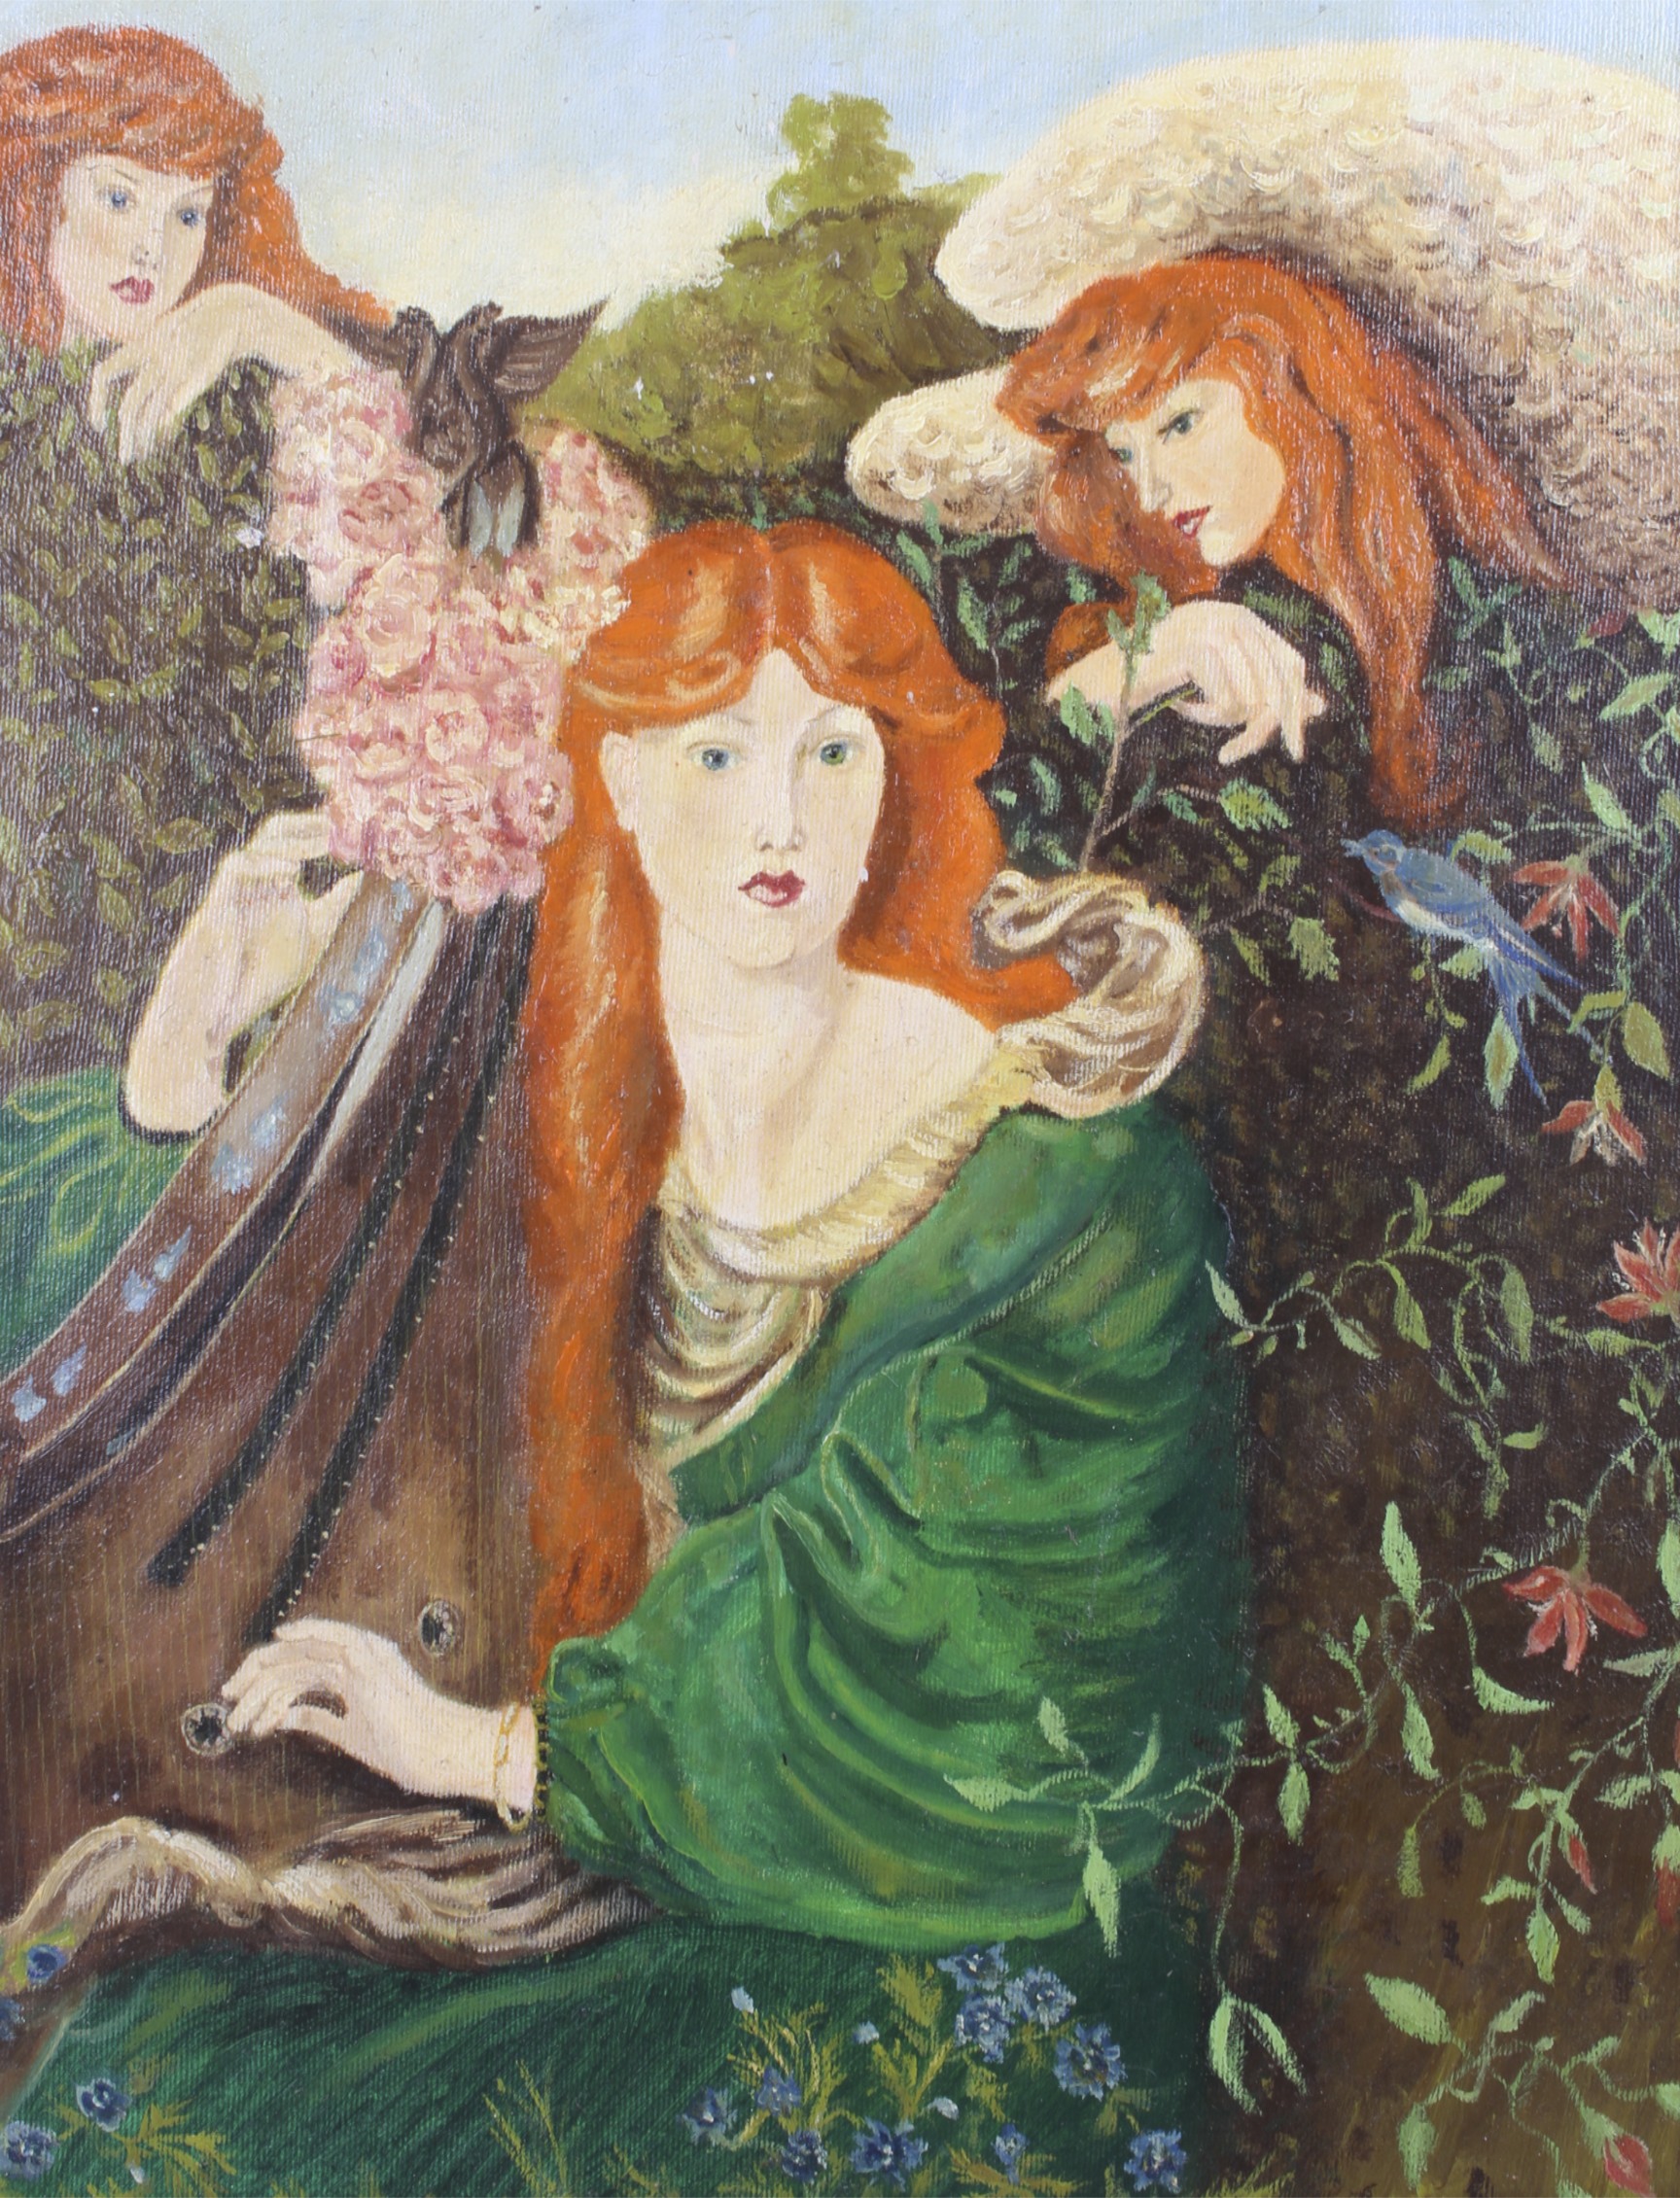 A Pre-Raphaelite style oil on canvas. Depicting three women dressed in medieval attire.